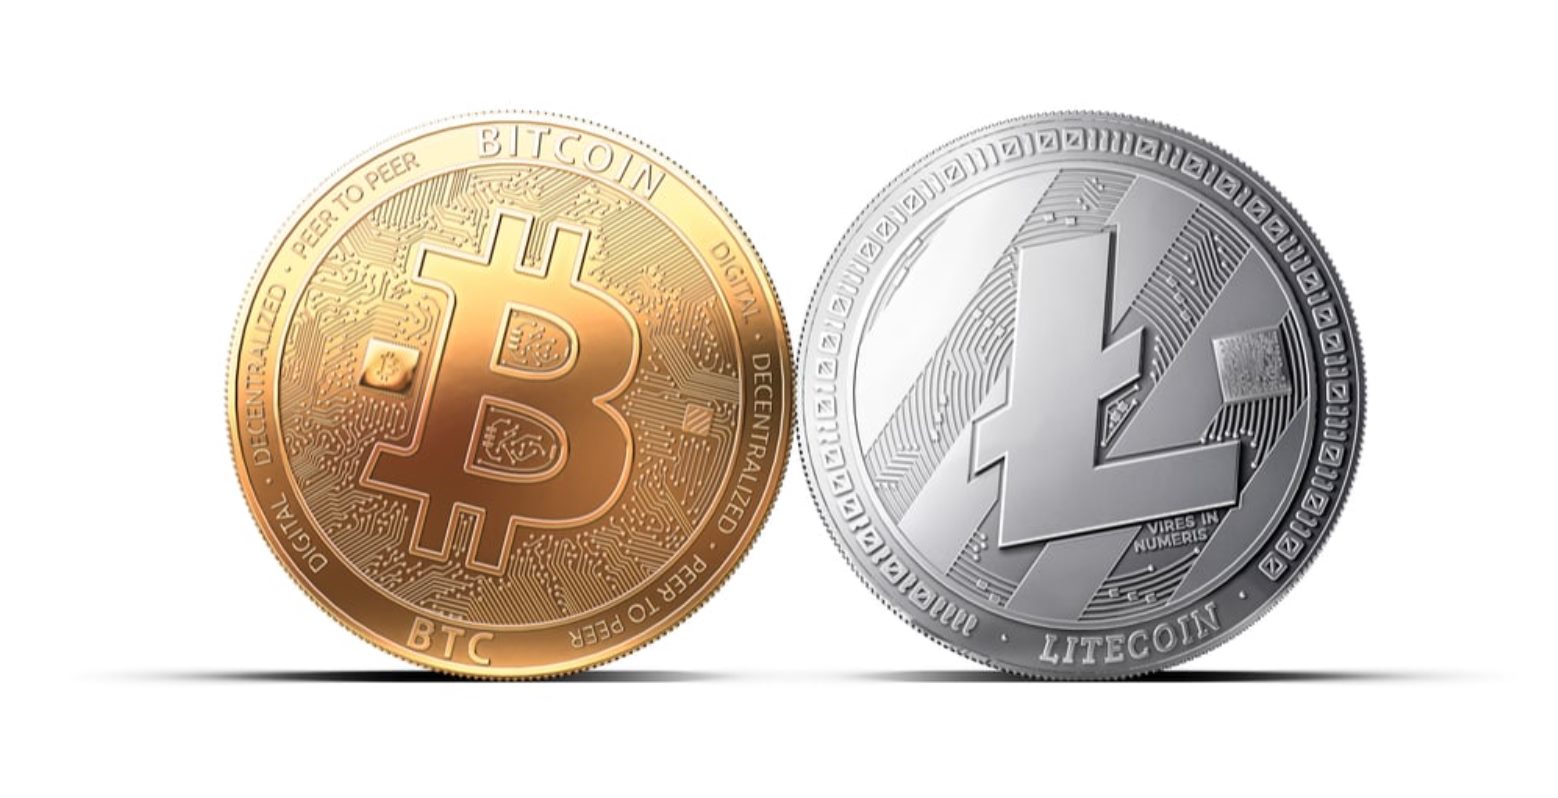 What Is Litecoin Compared To Bitcoin